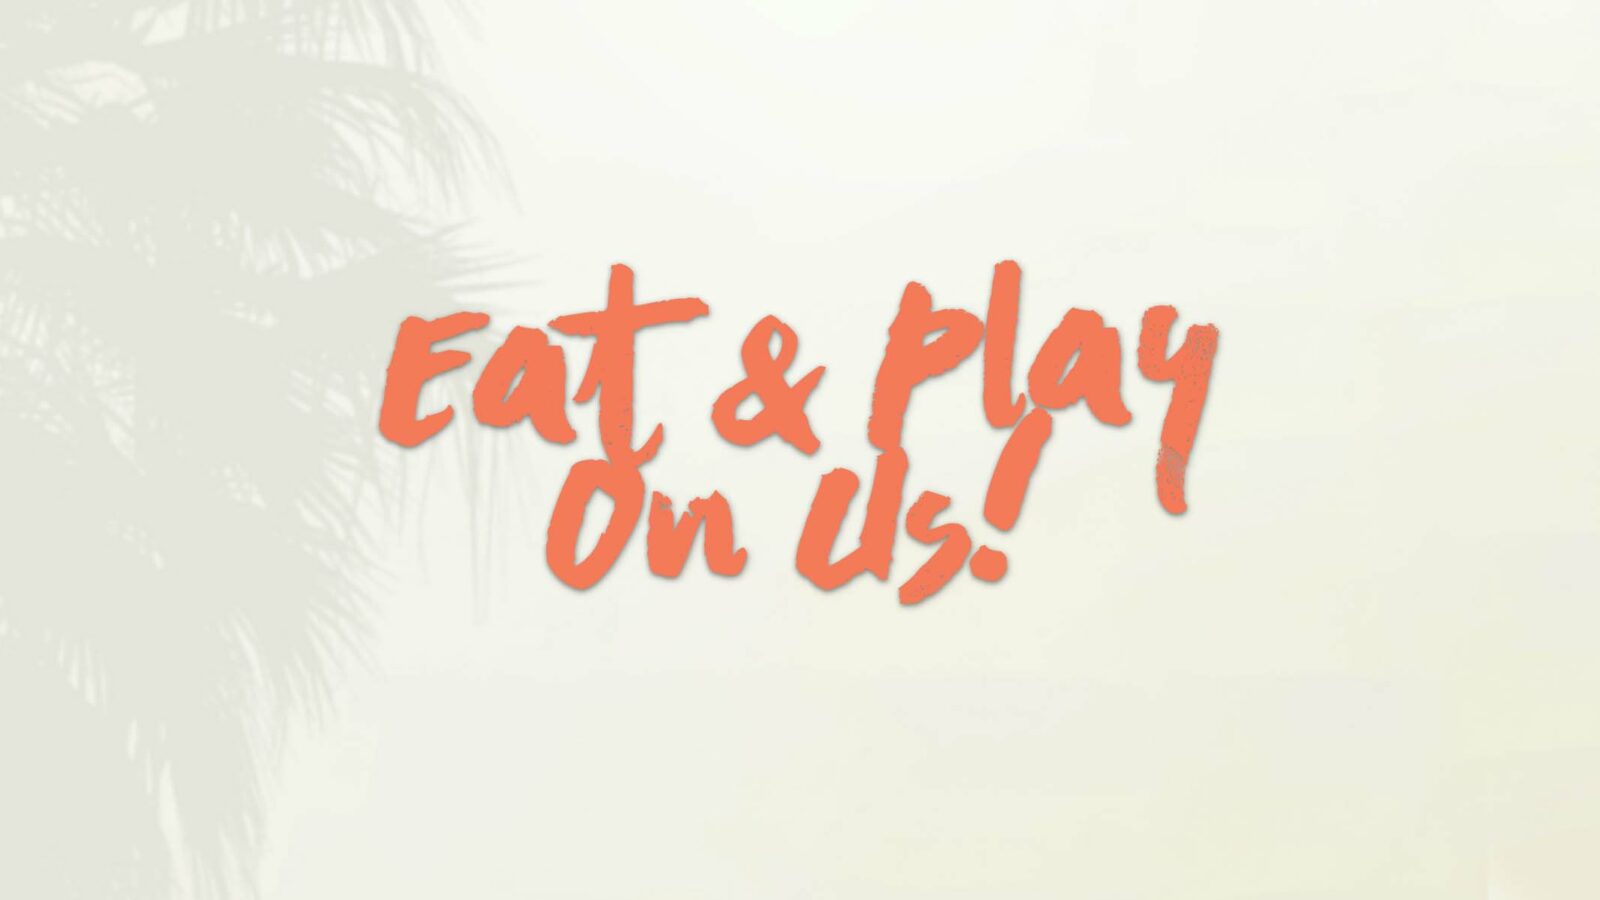 CATHEDRAL CITY EAT & PLAY